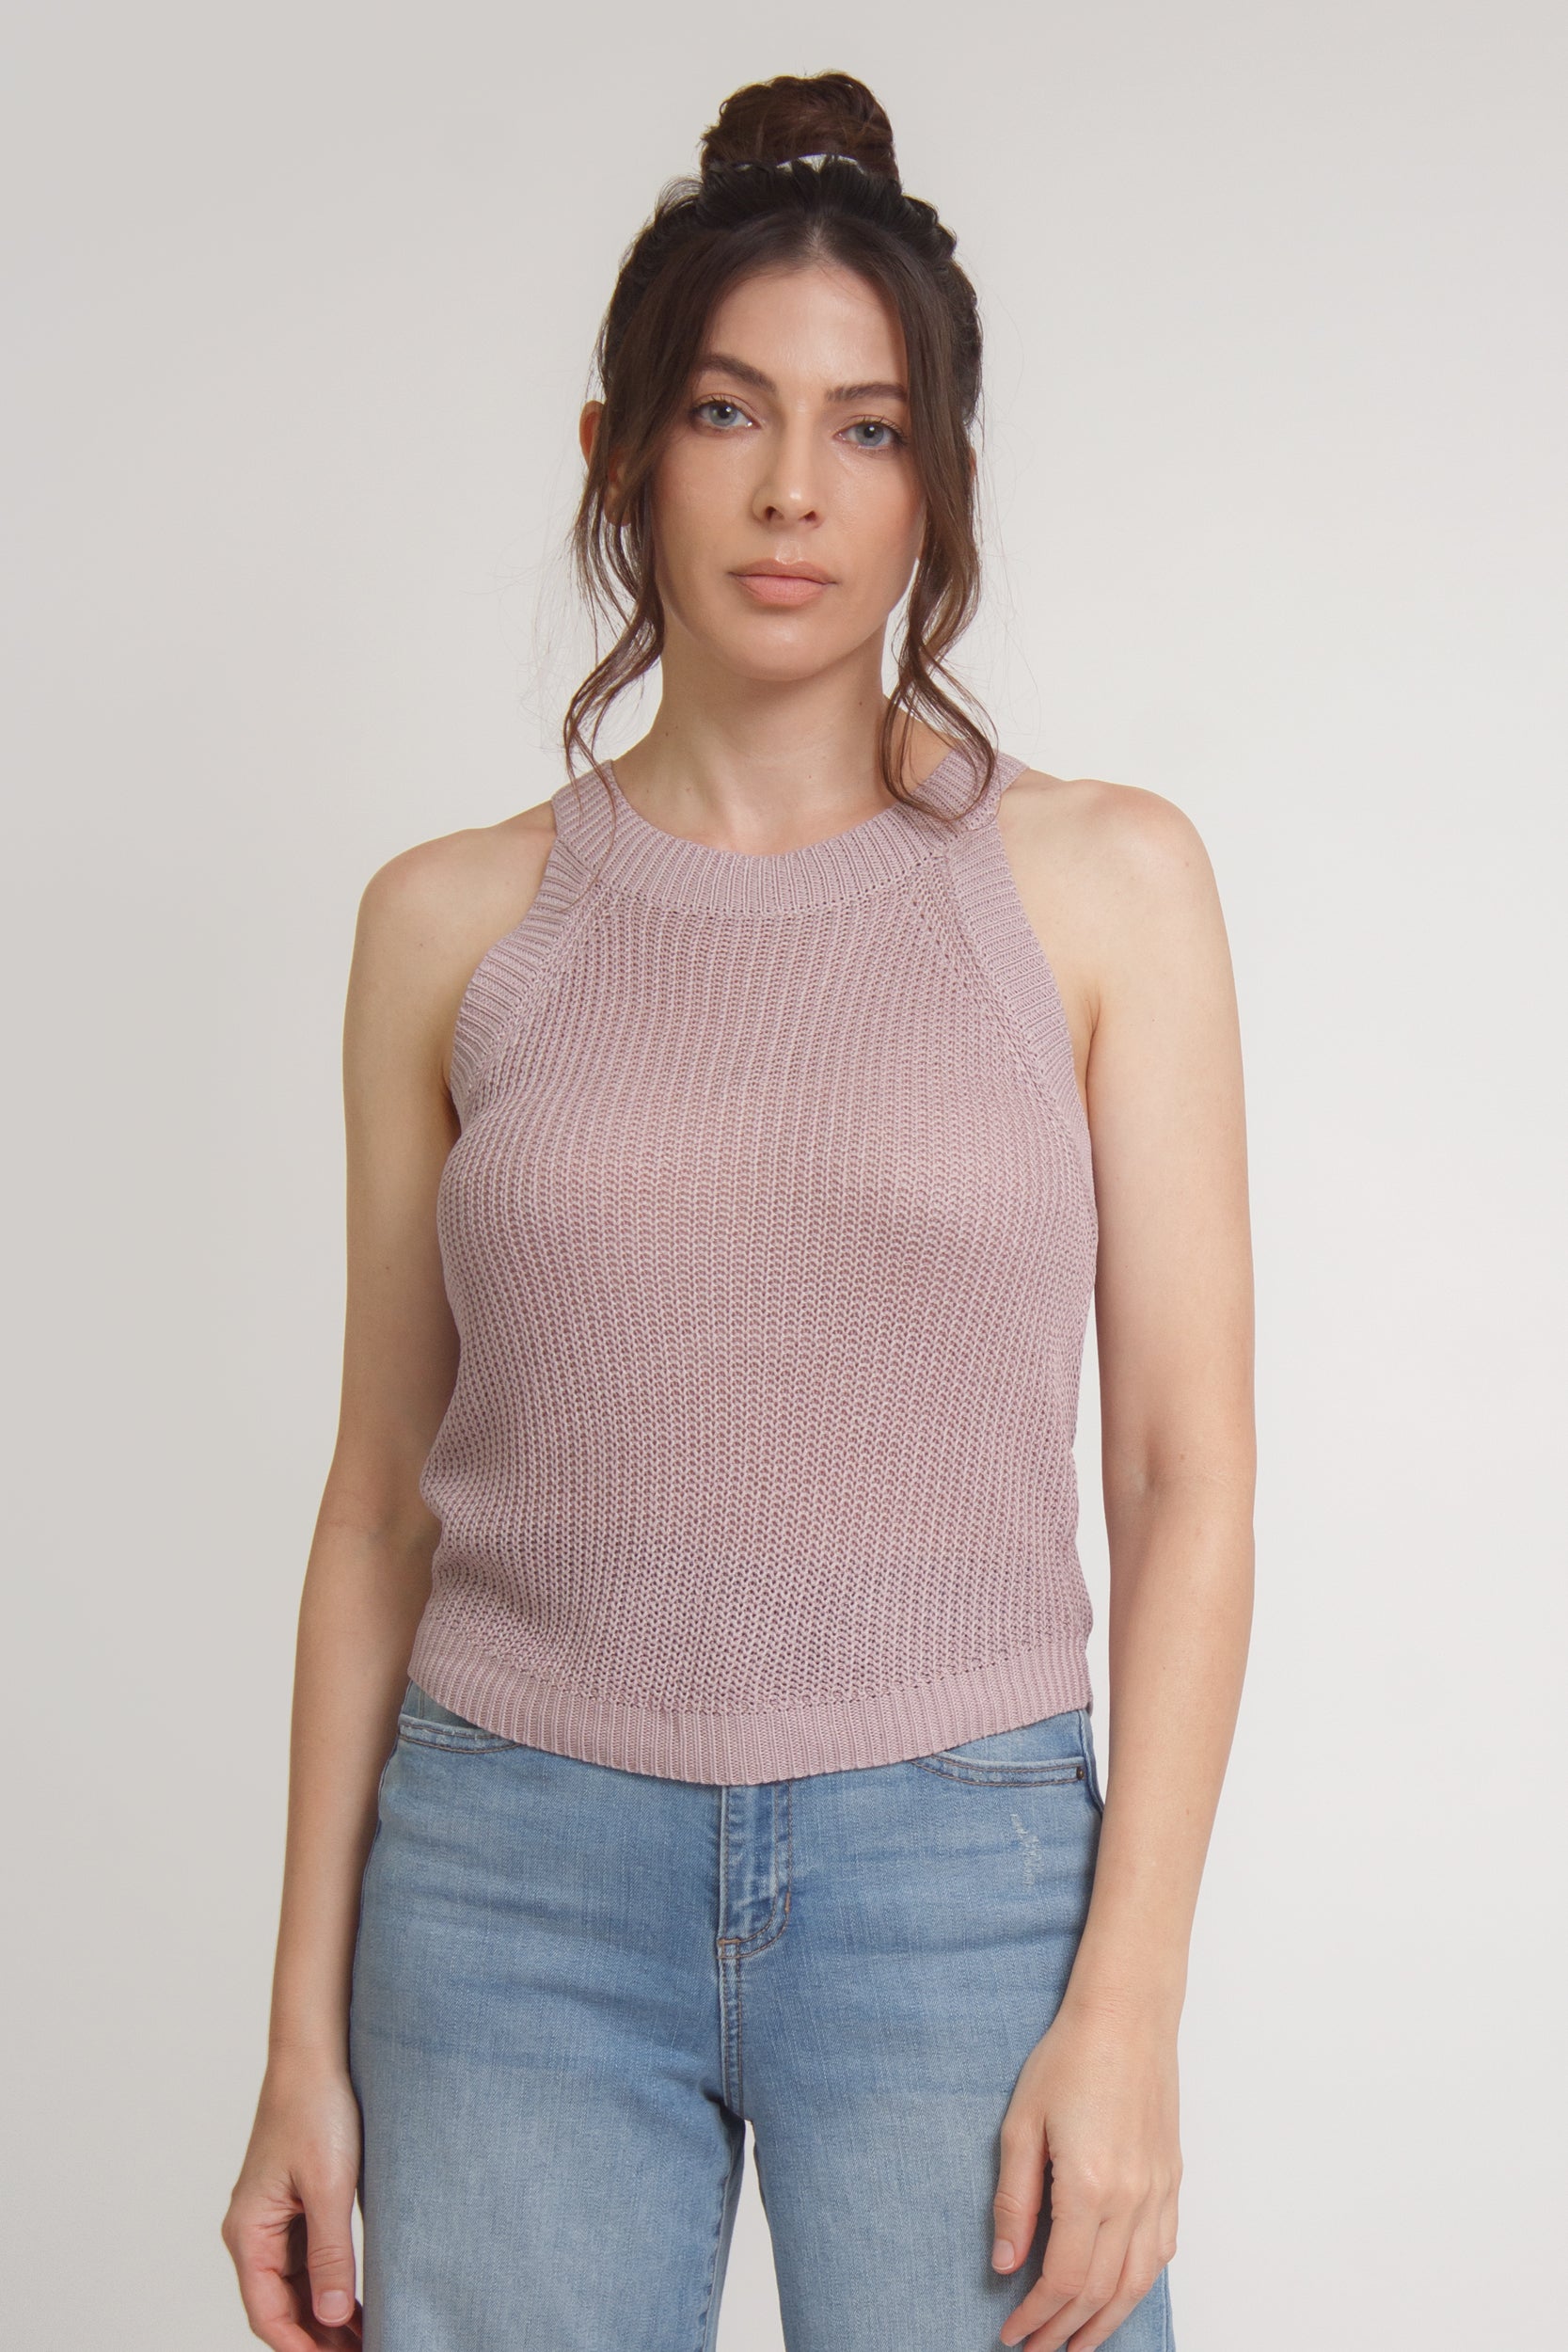 Sweater knit tank top, in mauve. Image 12